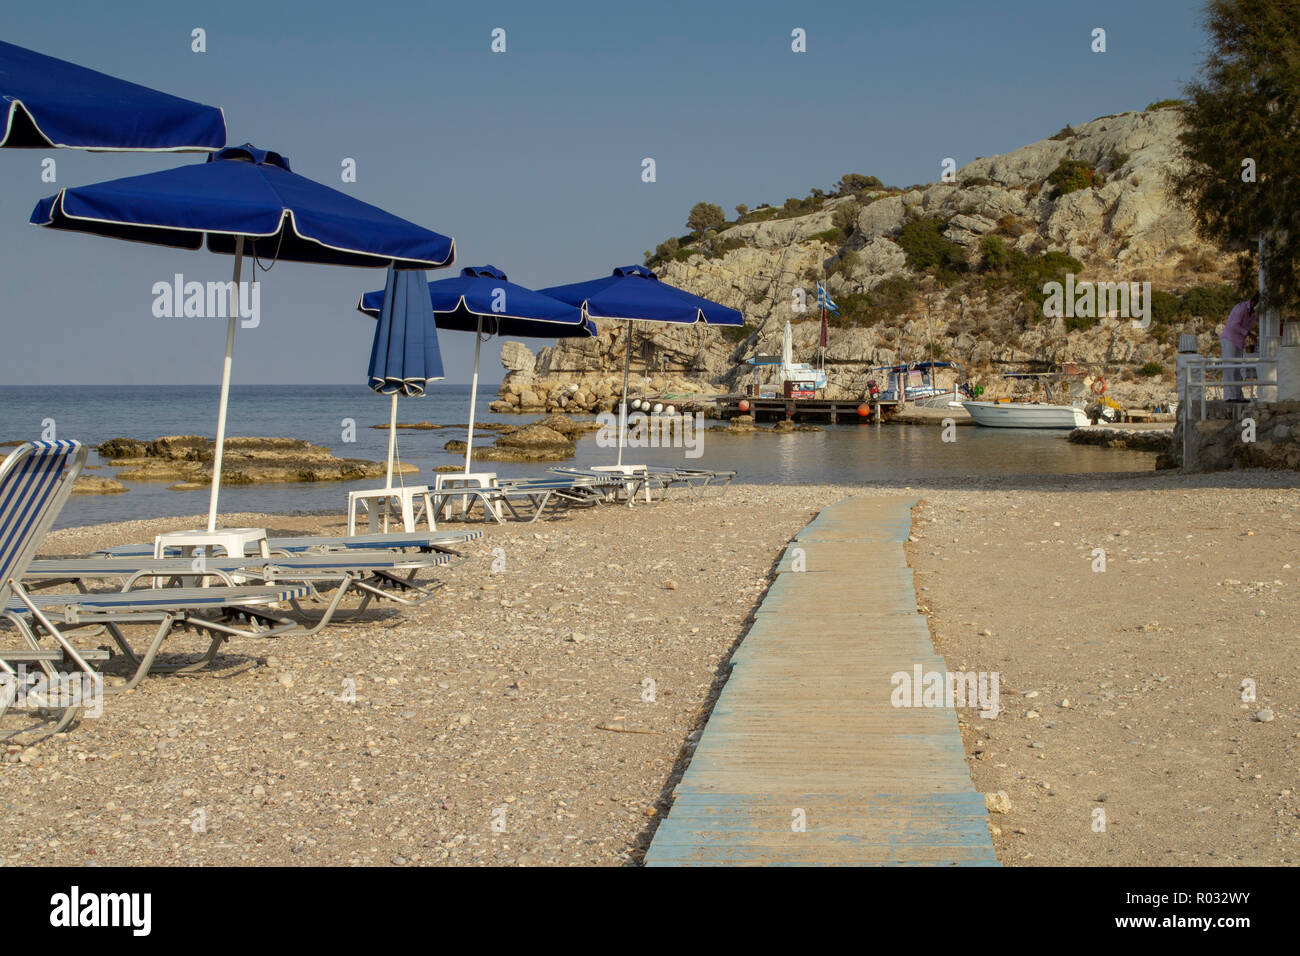 The beach leading to the boat jetty at Kolymbia, Rhodes,Greece, Stock Photo